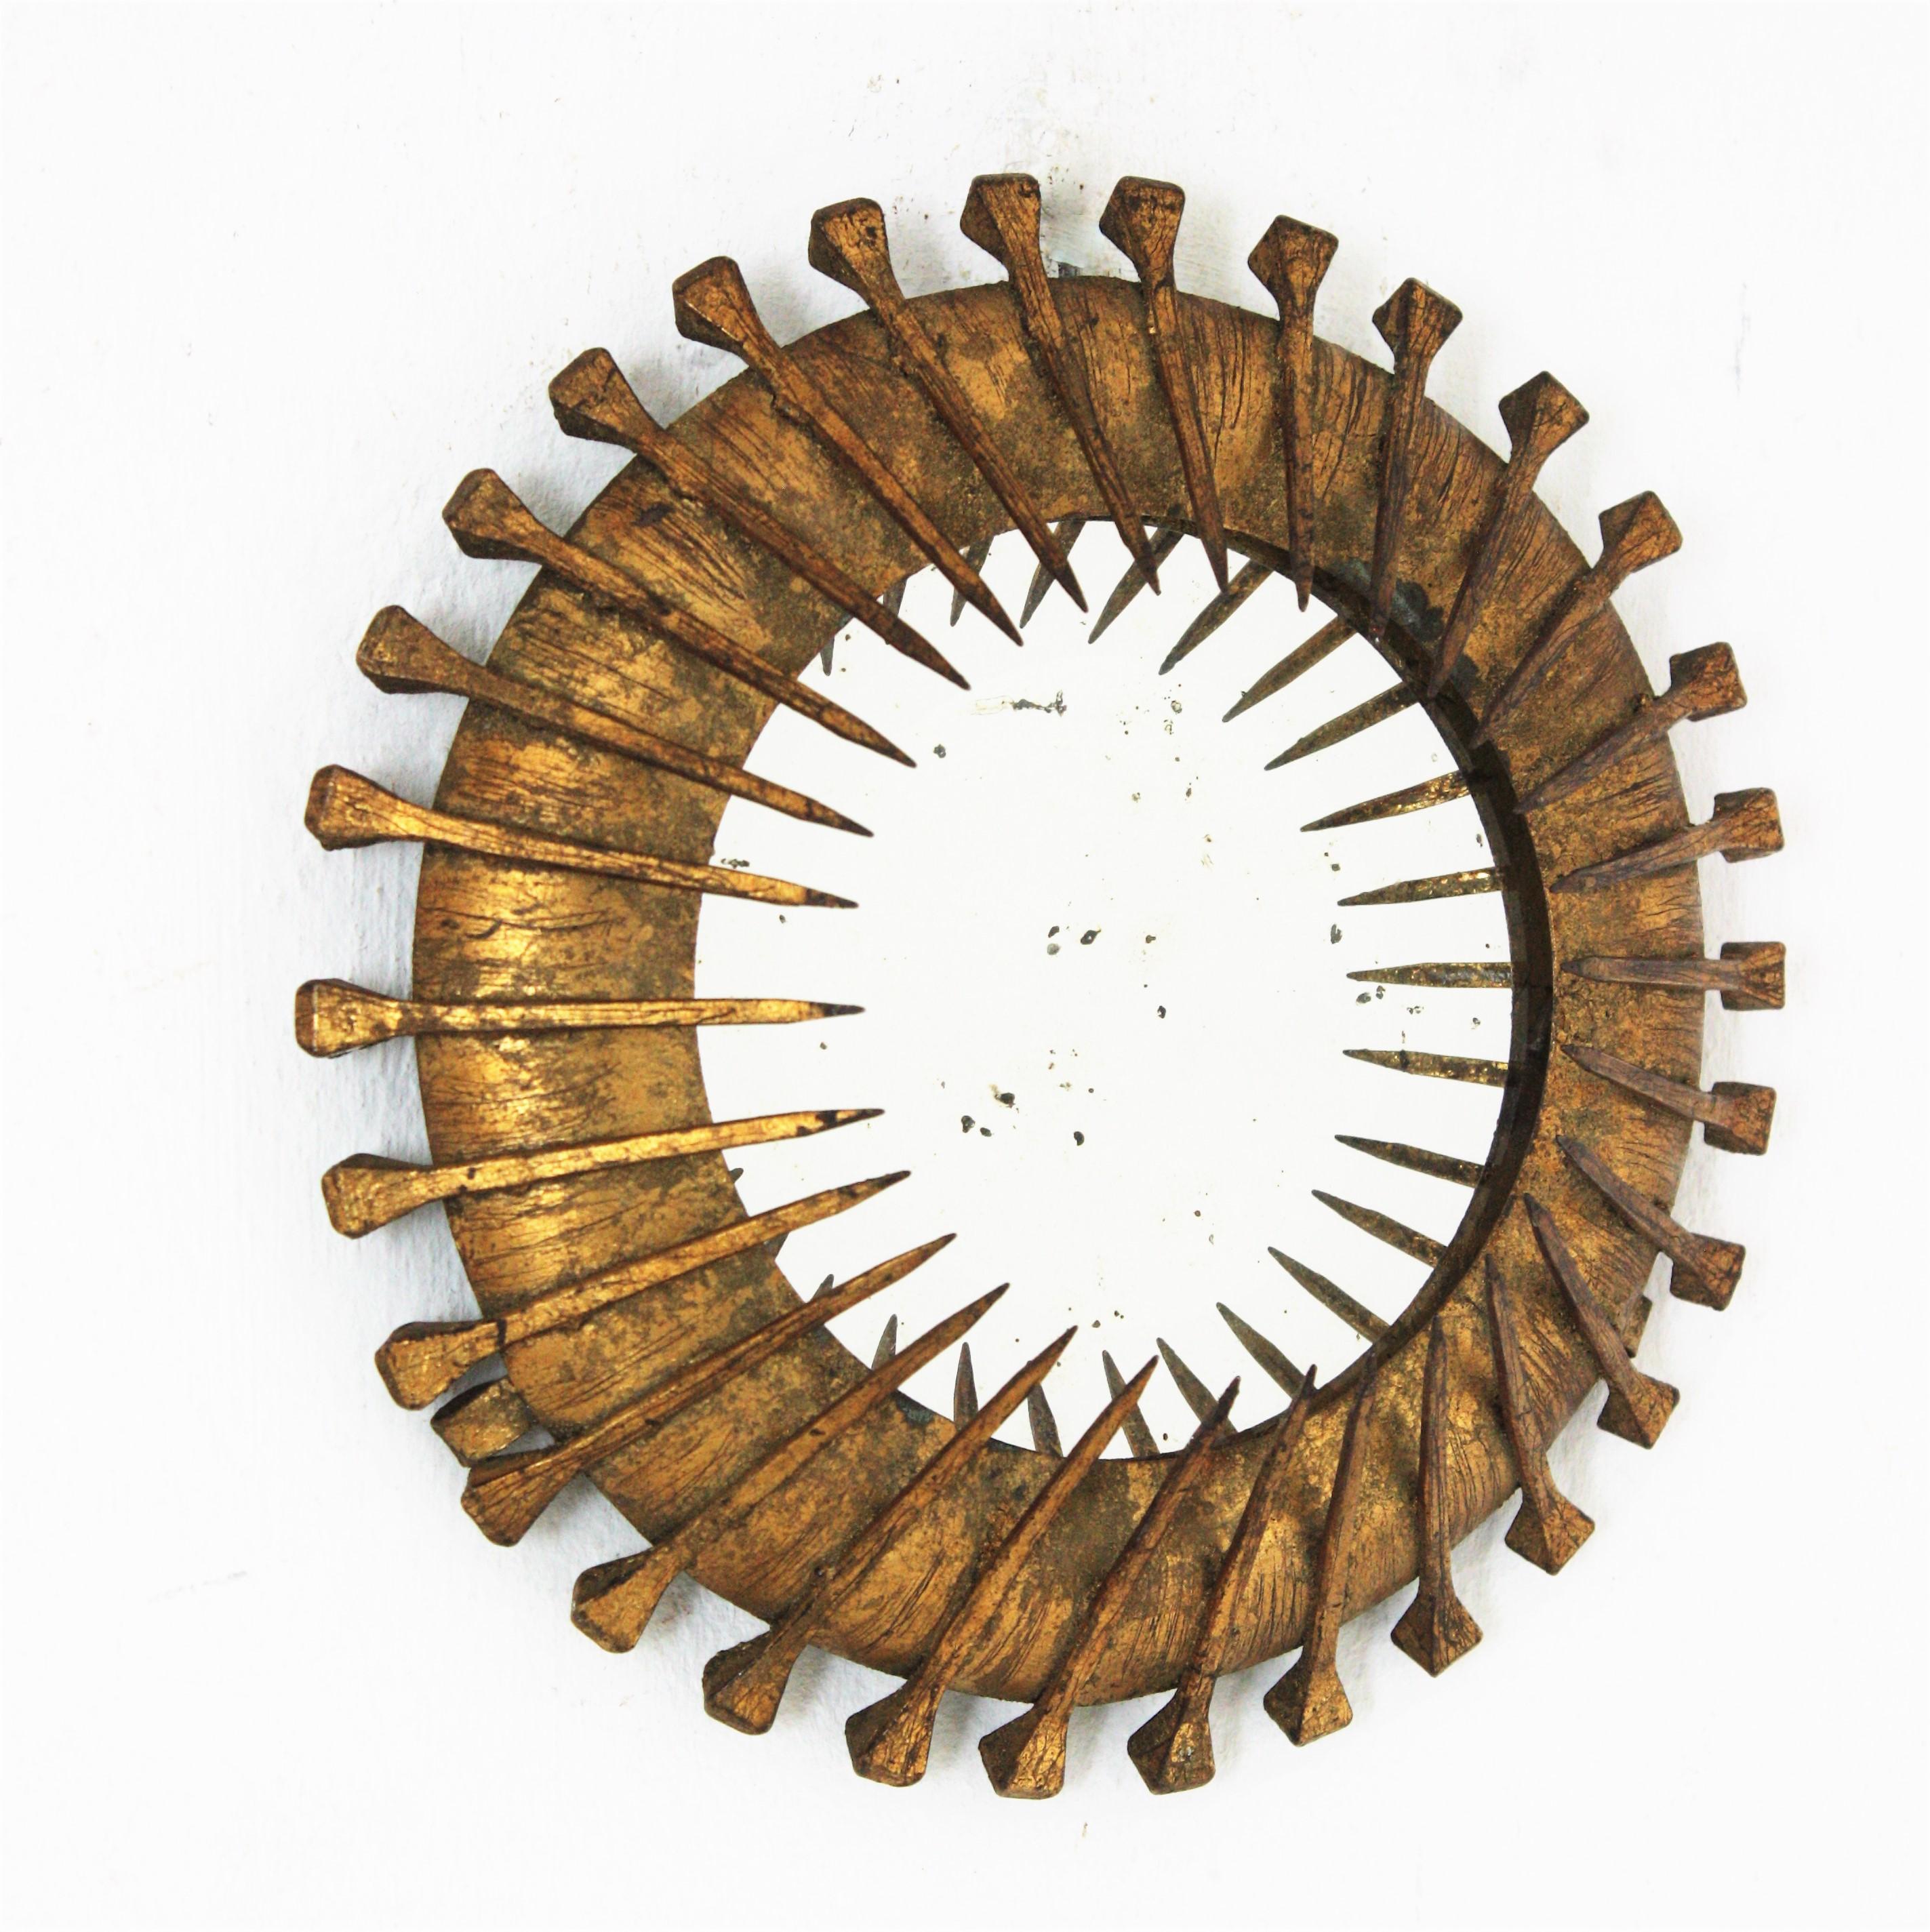 Mini sized sunburst mirror, gilt iron, gold leaf.
Brutalist spanish gilt iron sunburst mirrors with nails ornamentation. Spain, 1950s
This small sunburst mirror will be eye-catching placed alone or as a part of a sunburst mirror wall composition.